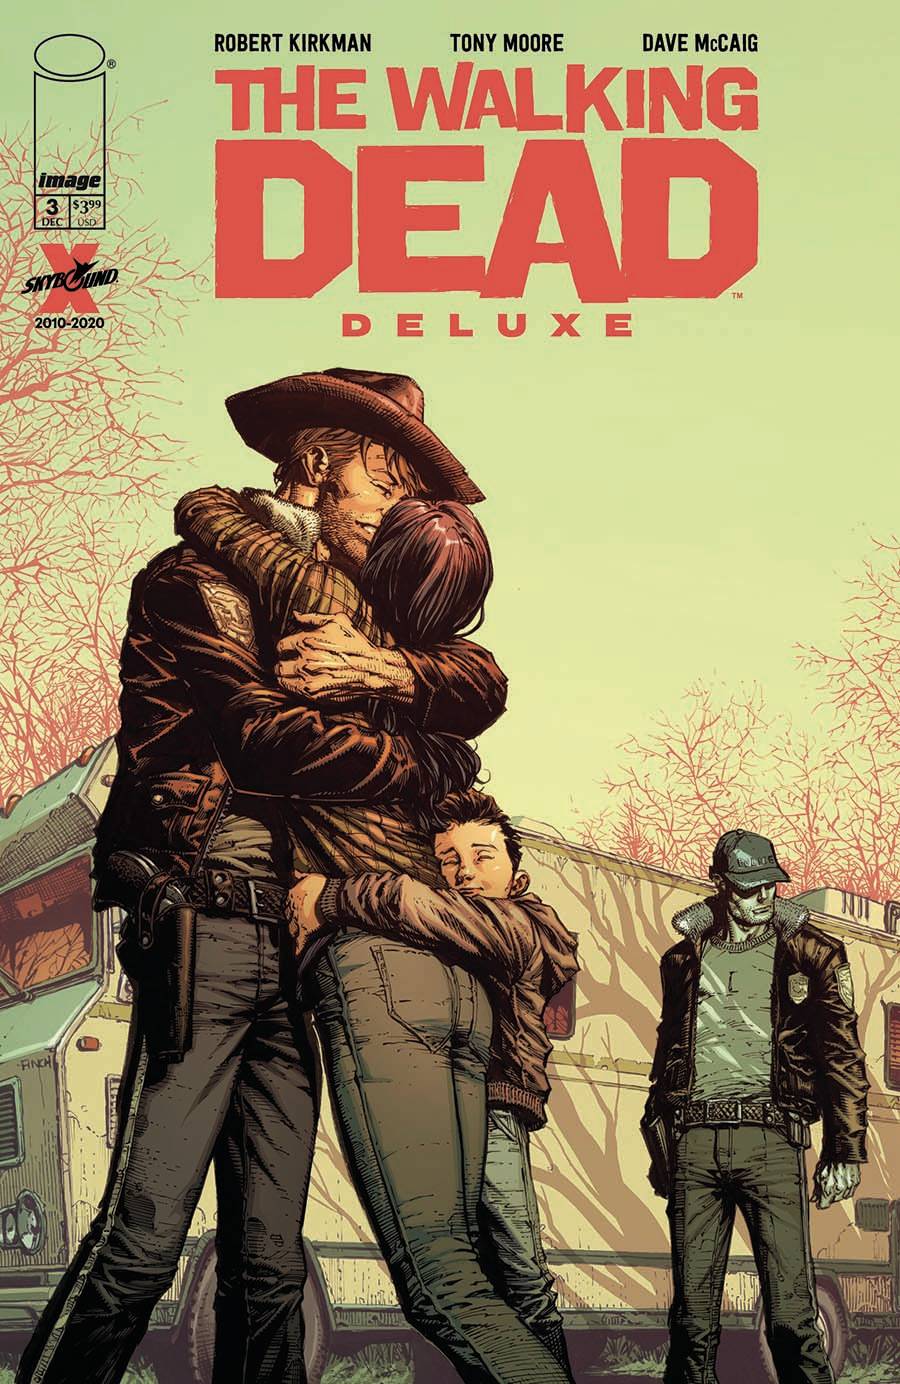 WALKING DEAD DELUXE #10 COVER A FINCH & MCCAIG VF/NM 2021 IMAGE HOHC